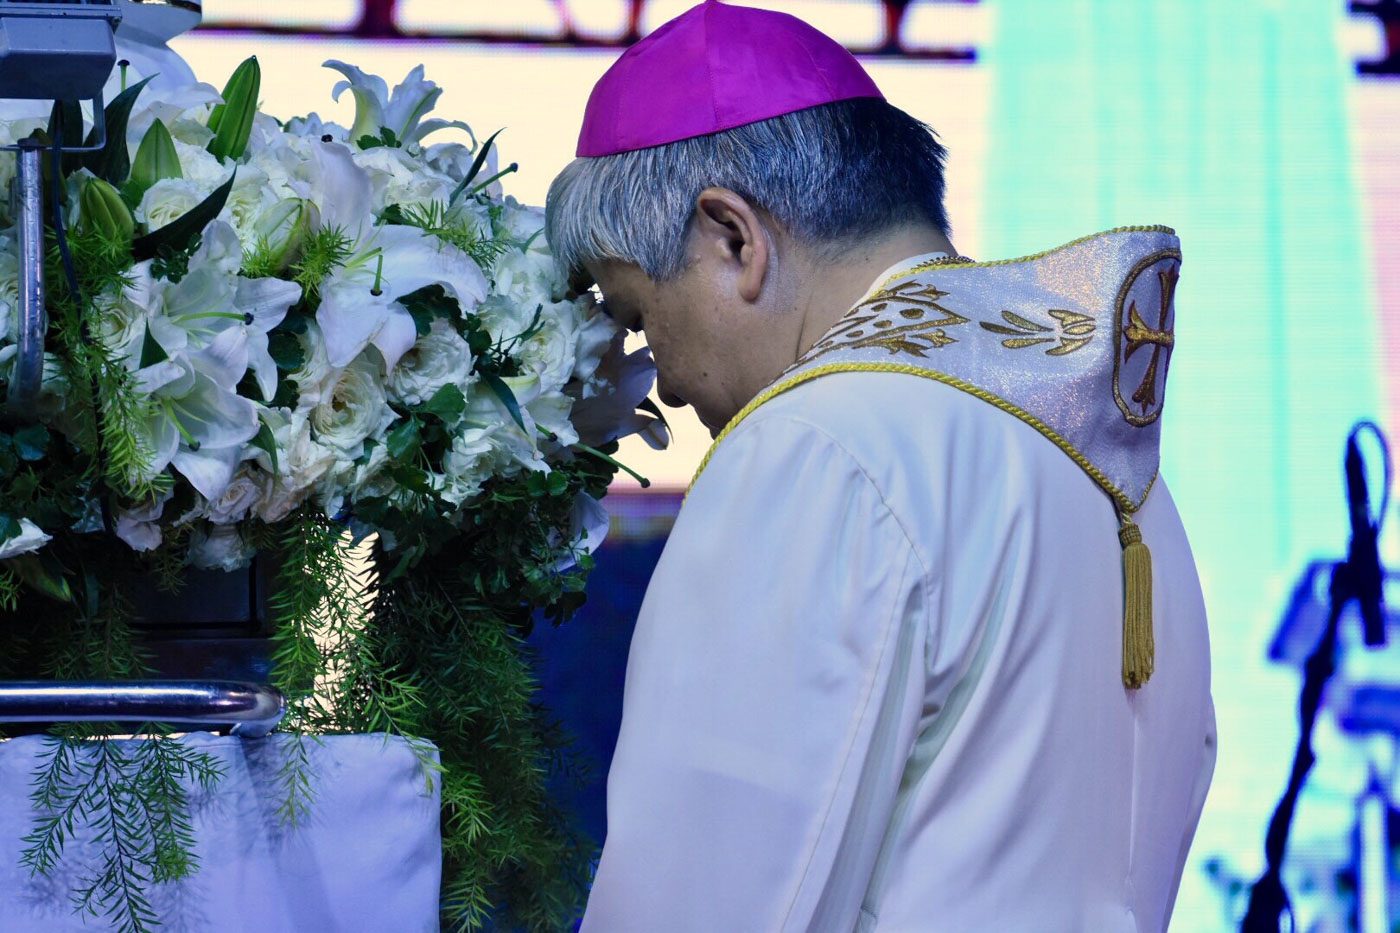 Archbishop Villegas to De Lima: Your detention is ‘biggest symbol’ of PH decay